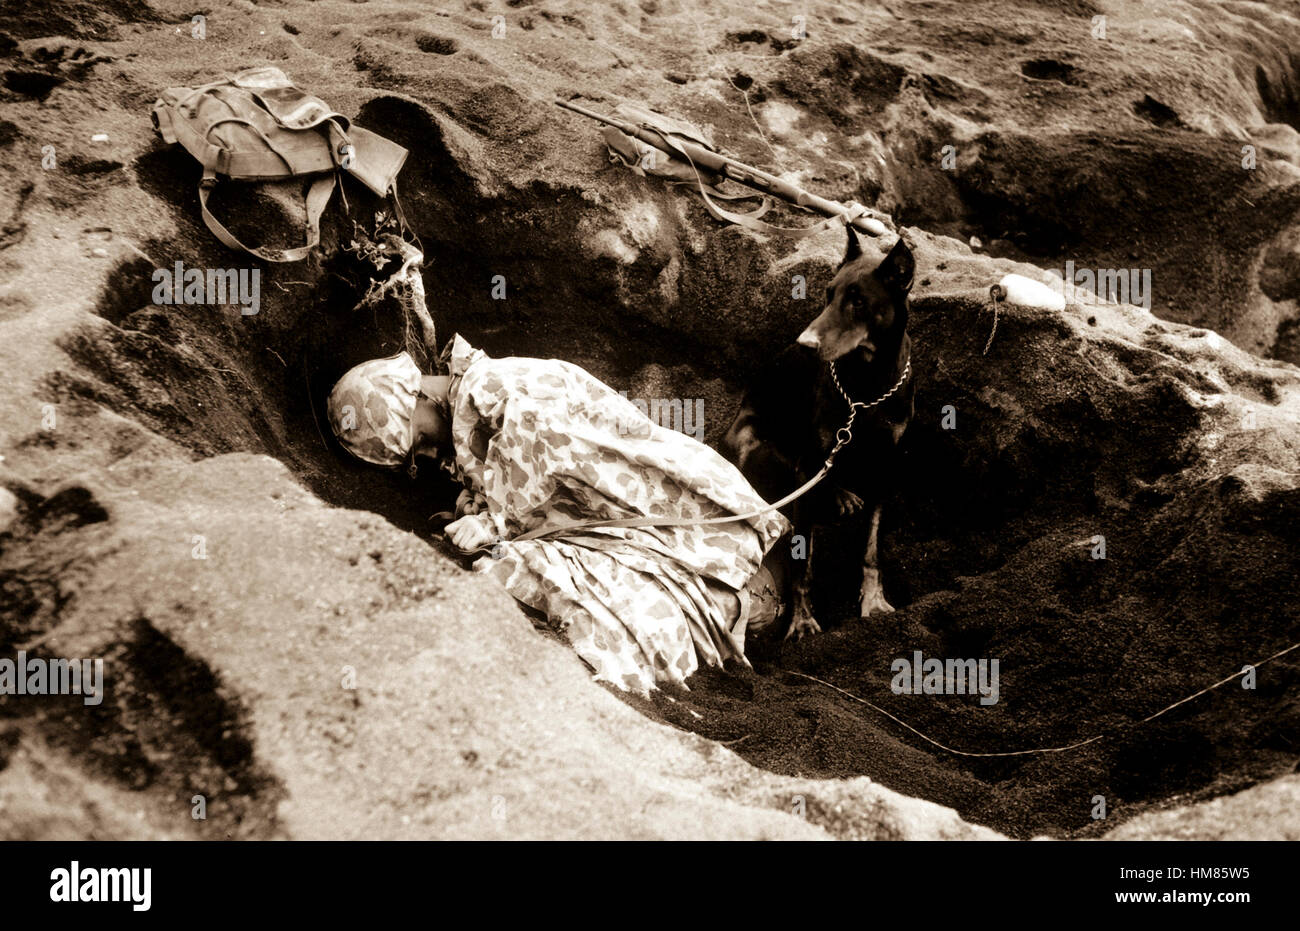 Pfc. Rez P. Hester, 7th War Dog Platoon, 25th Regt., takes a nap while Butch, his war dog, stands guard.  Iwo Jima, February 1945.  S.Sgt. M. Kauffman.  (Marine Corps) Exact Date Shot Unknown NARA FILE #:  127-N-110104 WAR & CONFLICT BOOK #:  882 Stock Photo